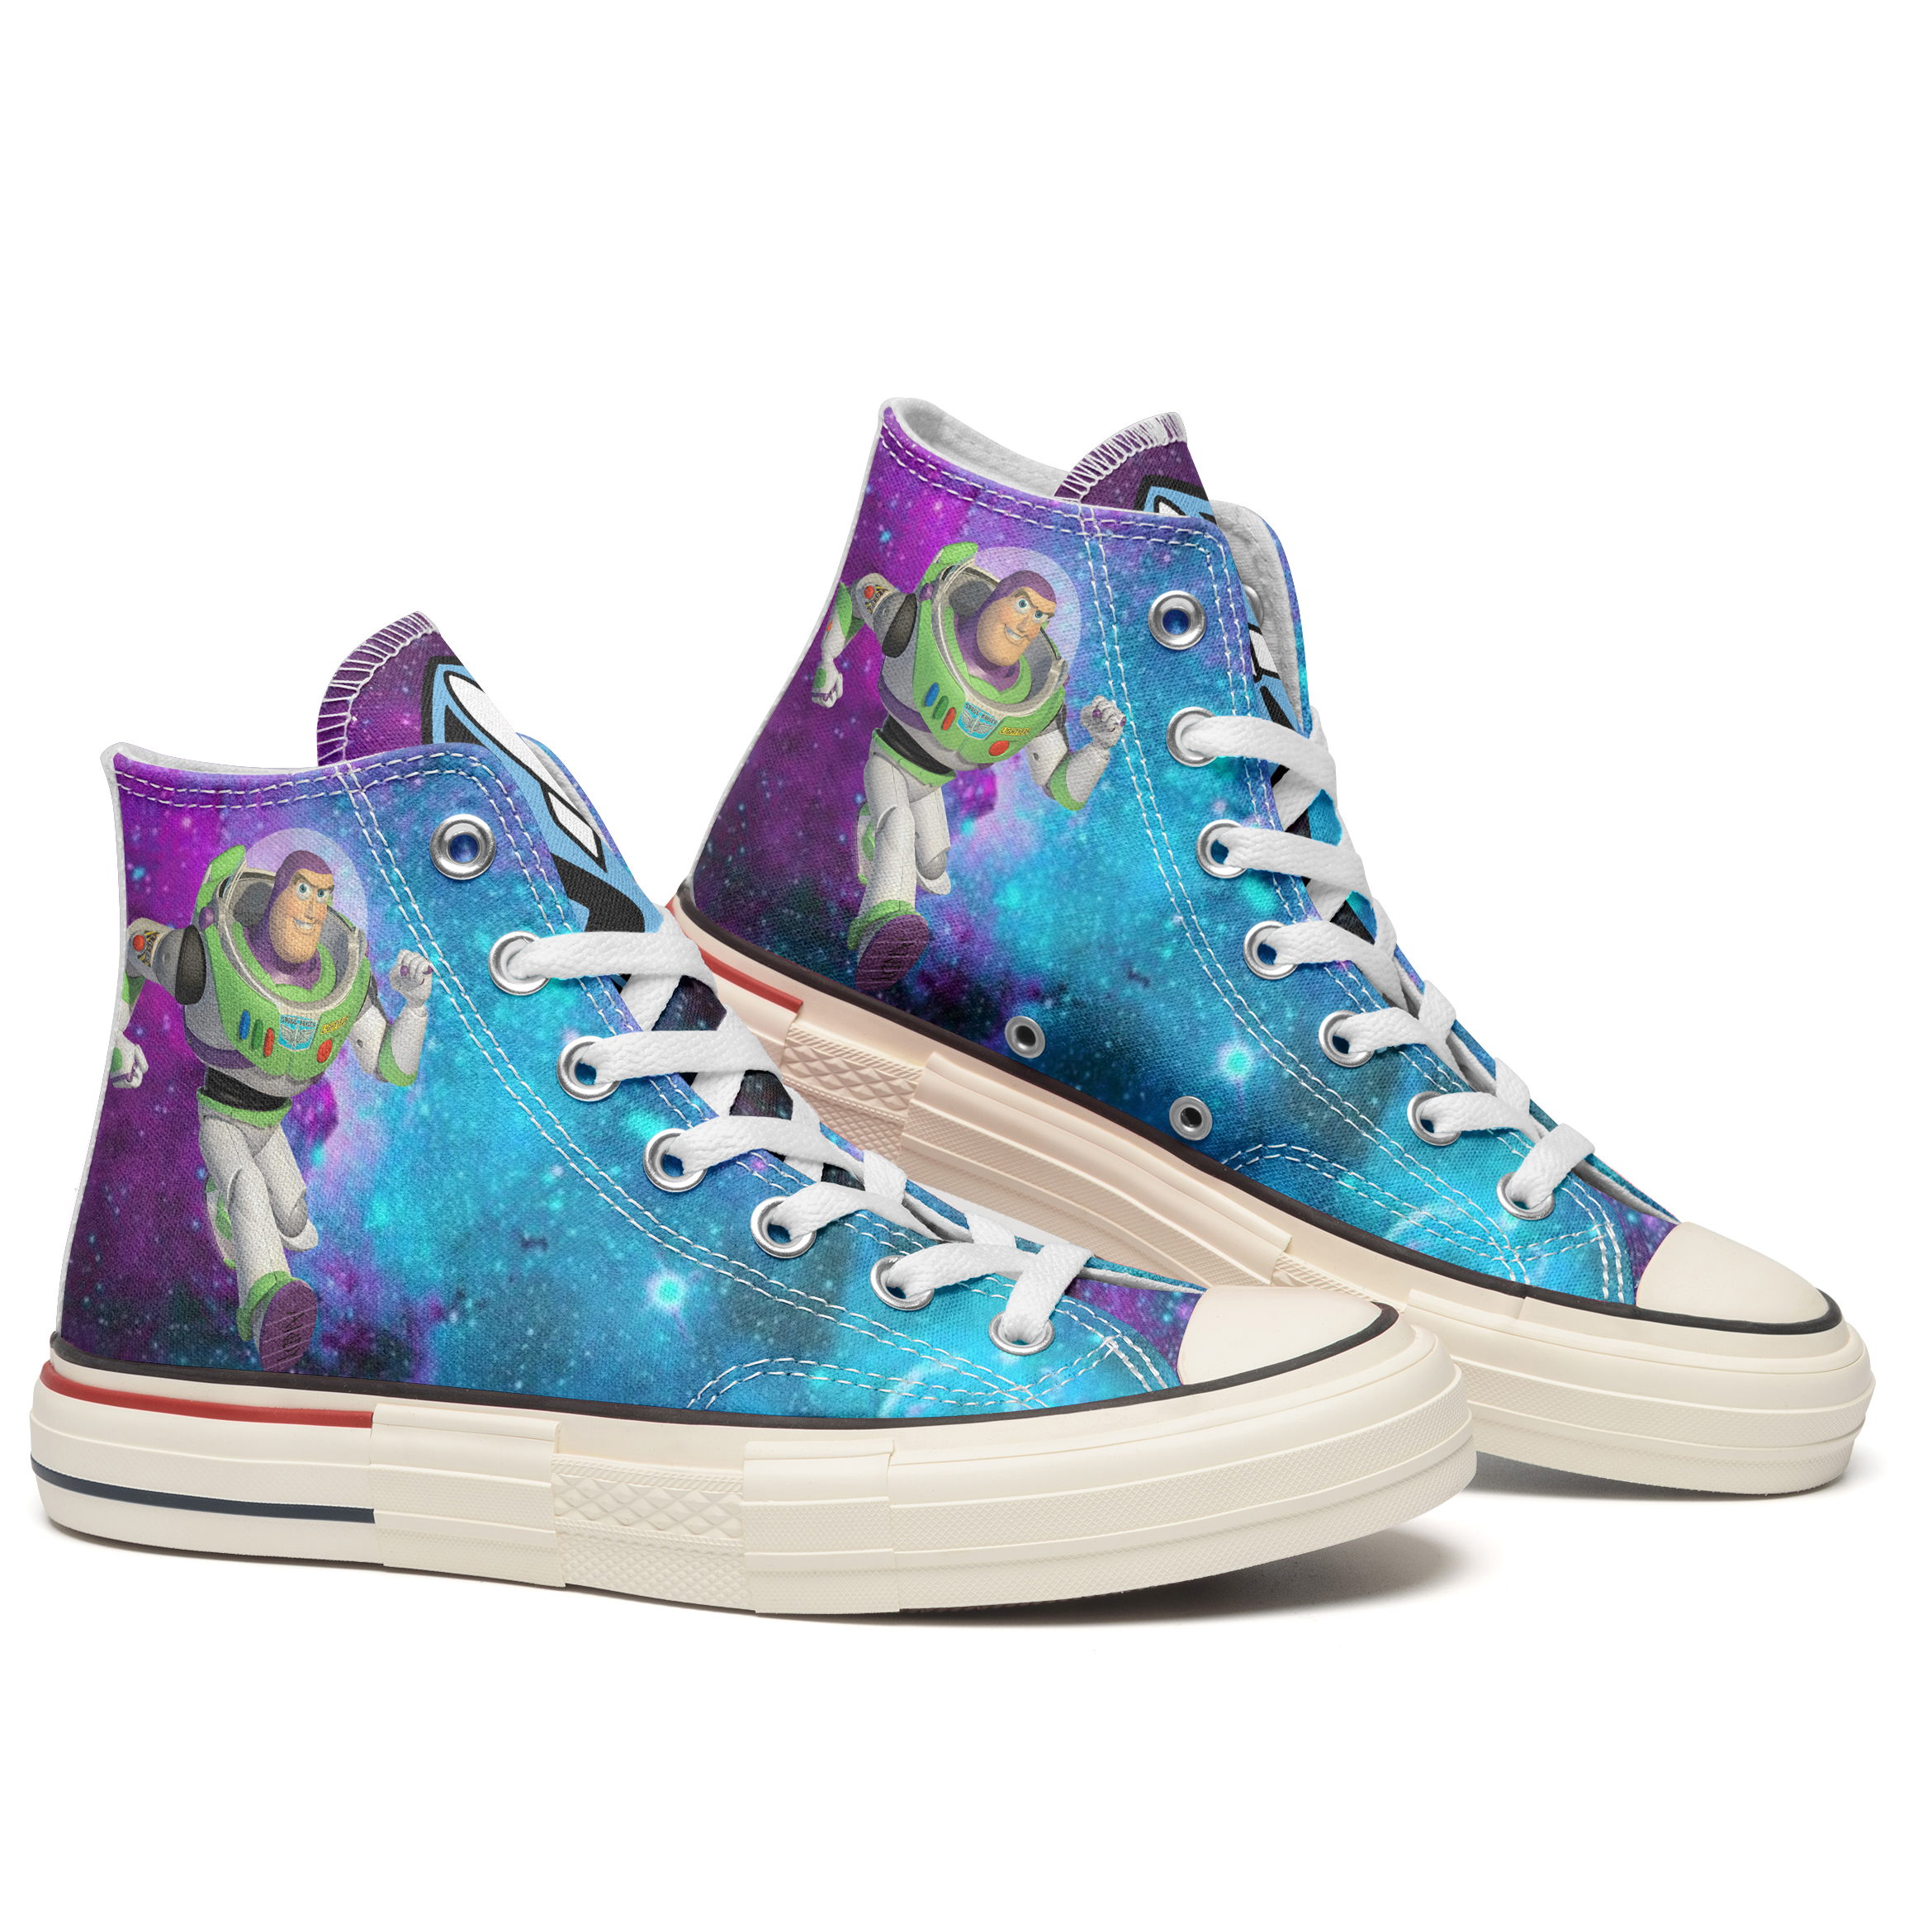 The Marvel Comic High Top Canvas Shoes Special Edition